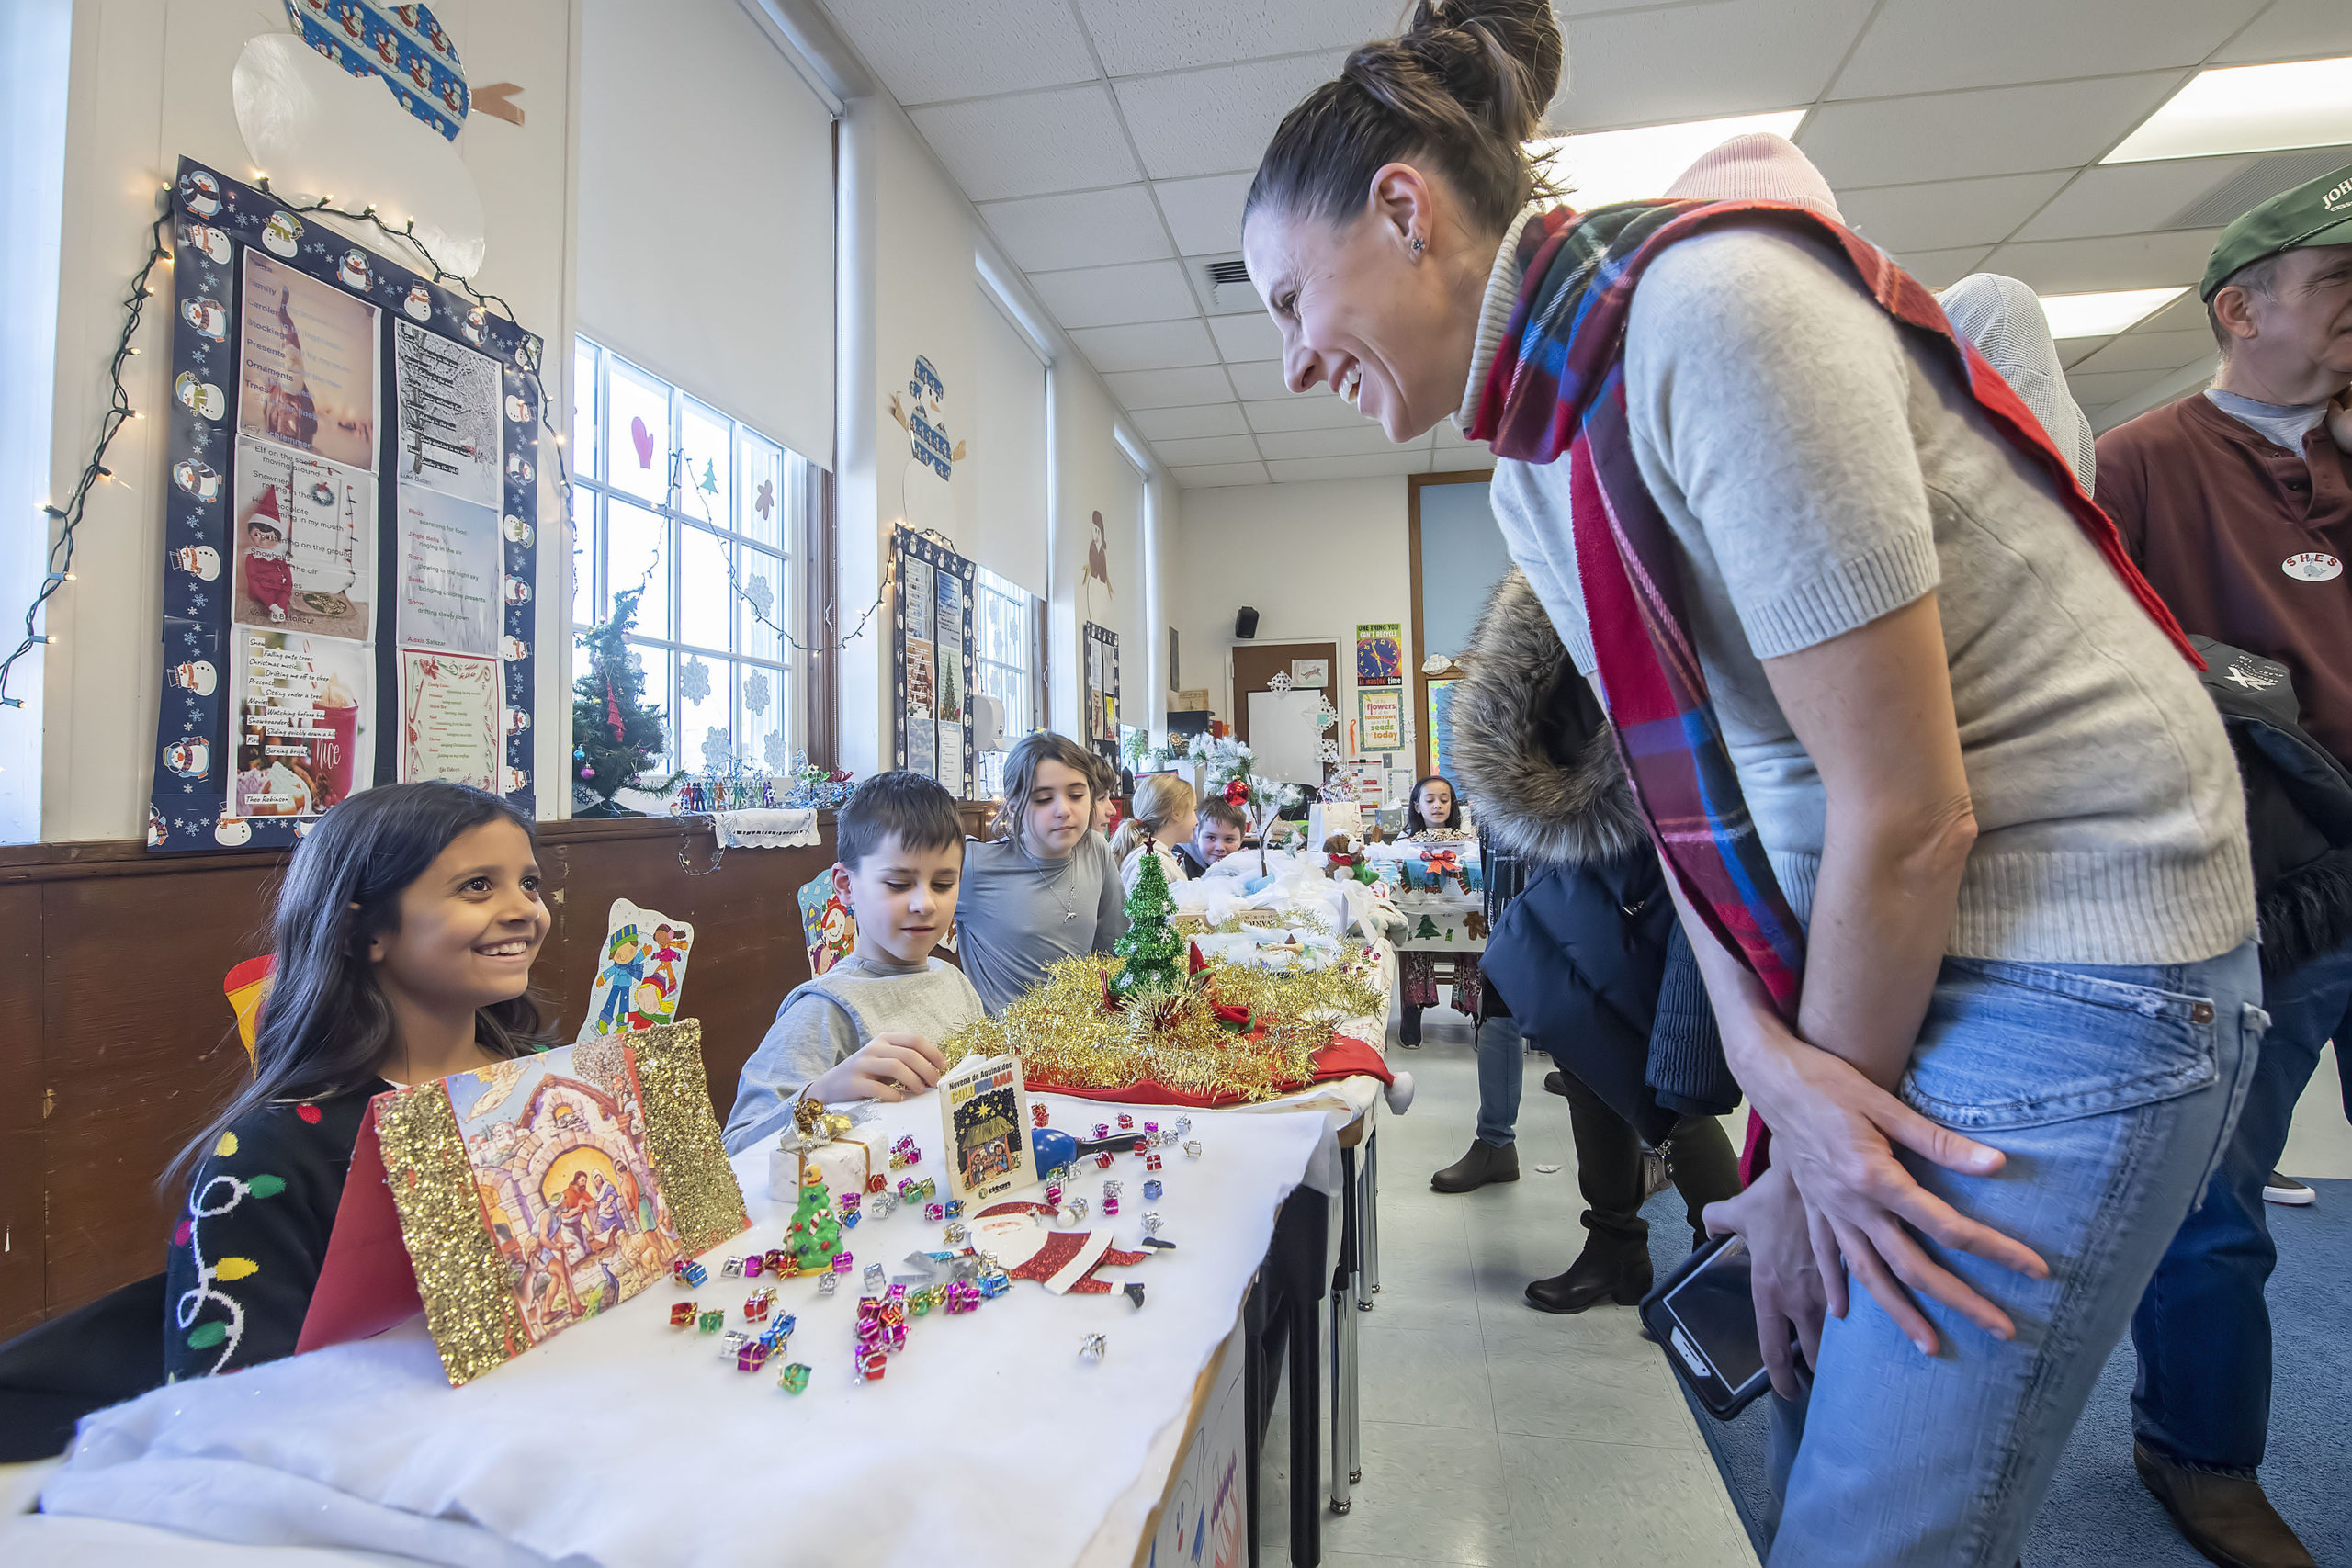 Erin Yaeger checks out Alexis Salazar's display depicting Baby Jesus during the annual Winter Museum Showcase event held by 4th Graders at the Sag Harbor Elementary School on Thursday morning.    MICHAEL HELLER